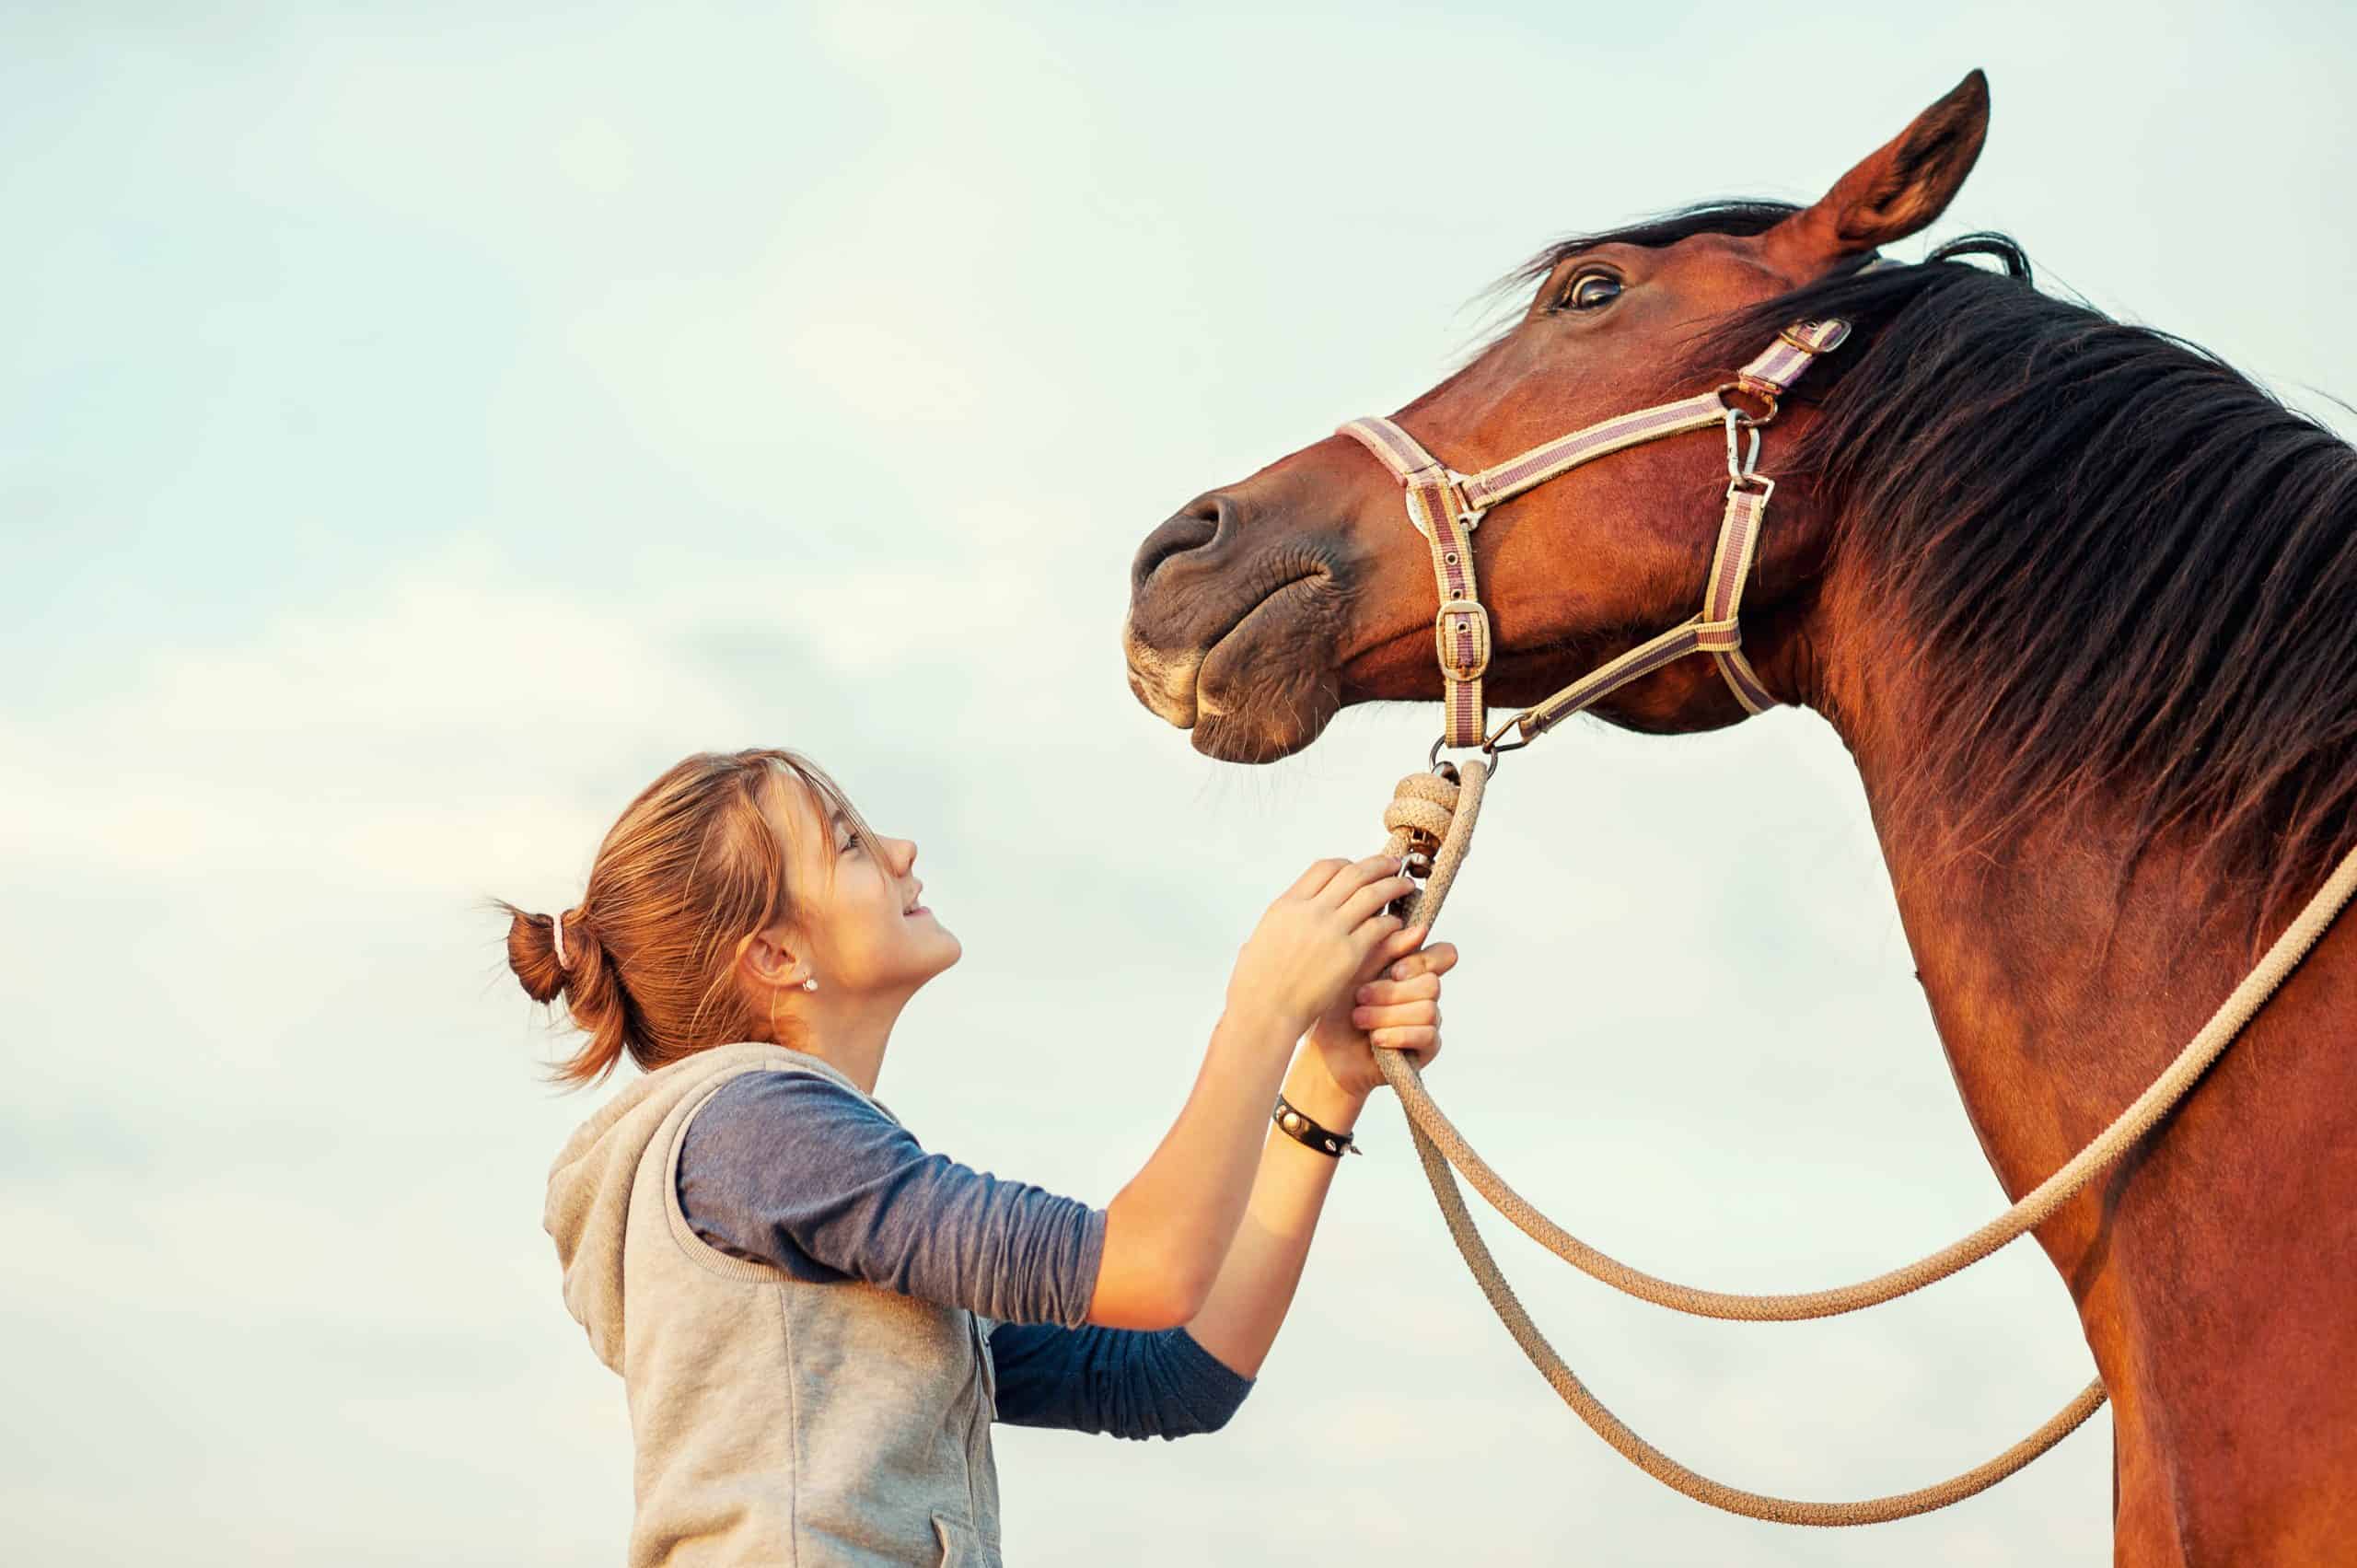 Young cheerful teenage girl calming big spirit chestnut horse. Vibrant multicolored summertime outdoors horizontal image with filter.